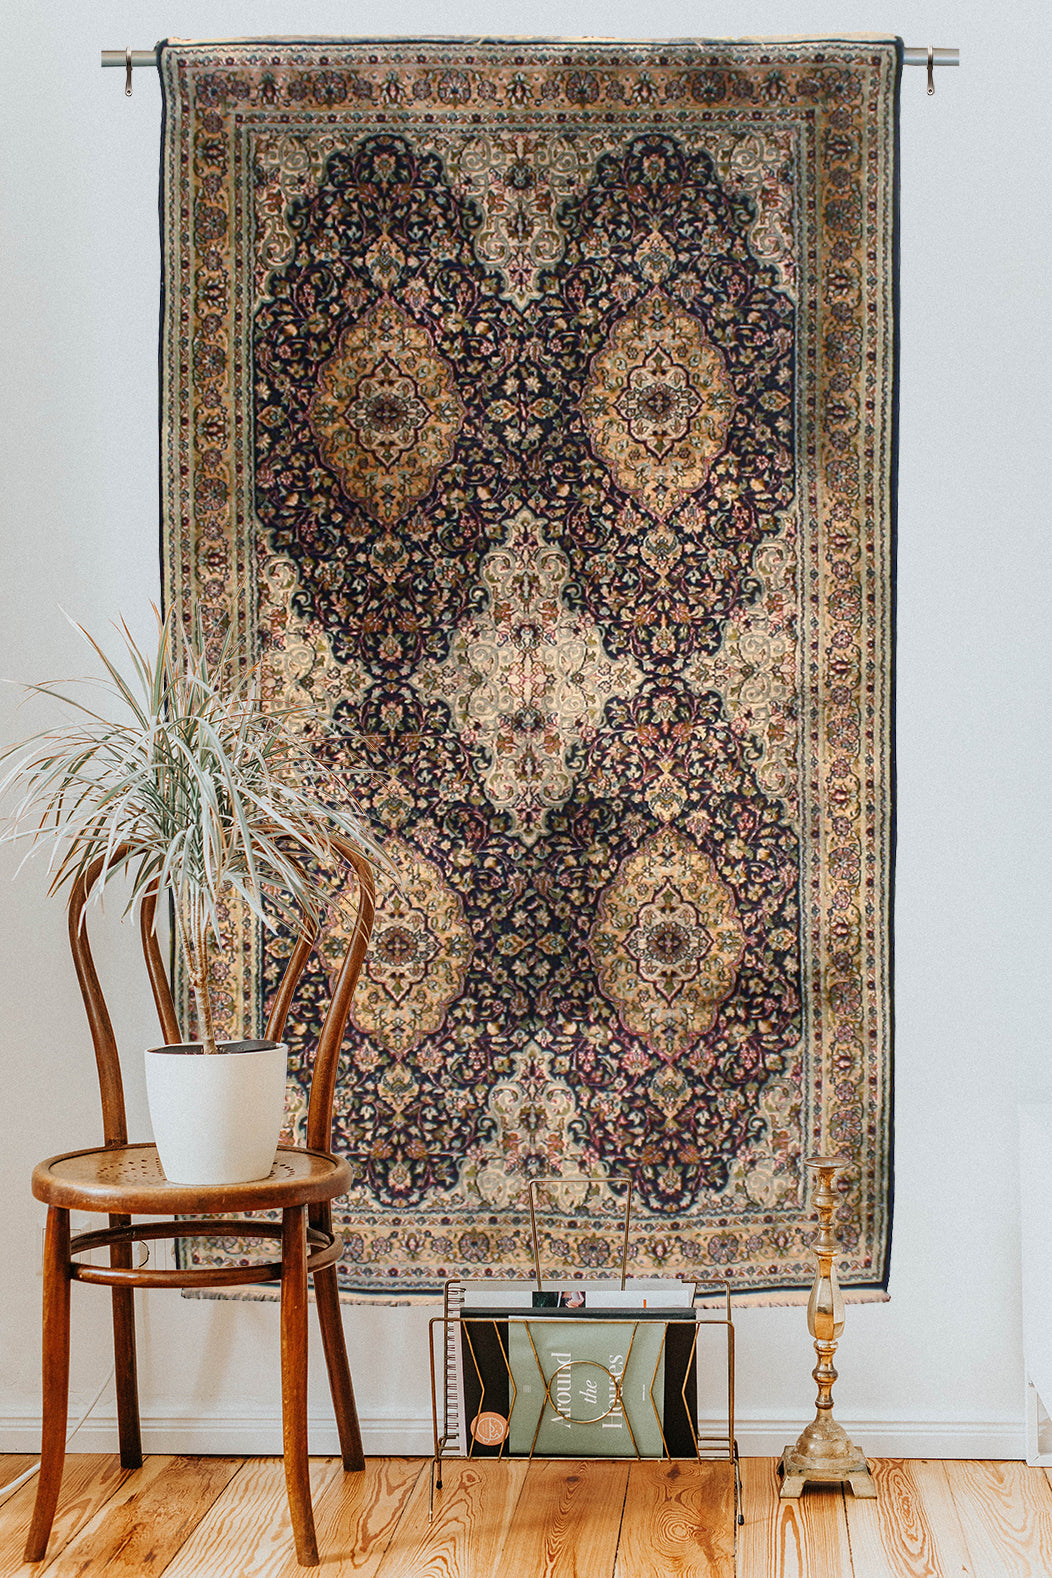 How to hang an Oriental rug on the wall